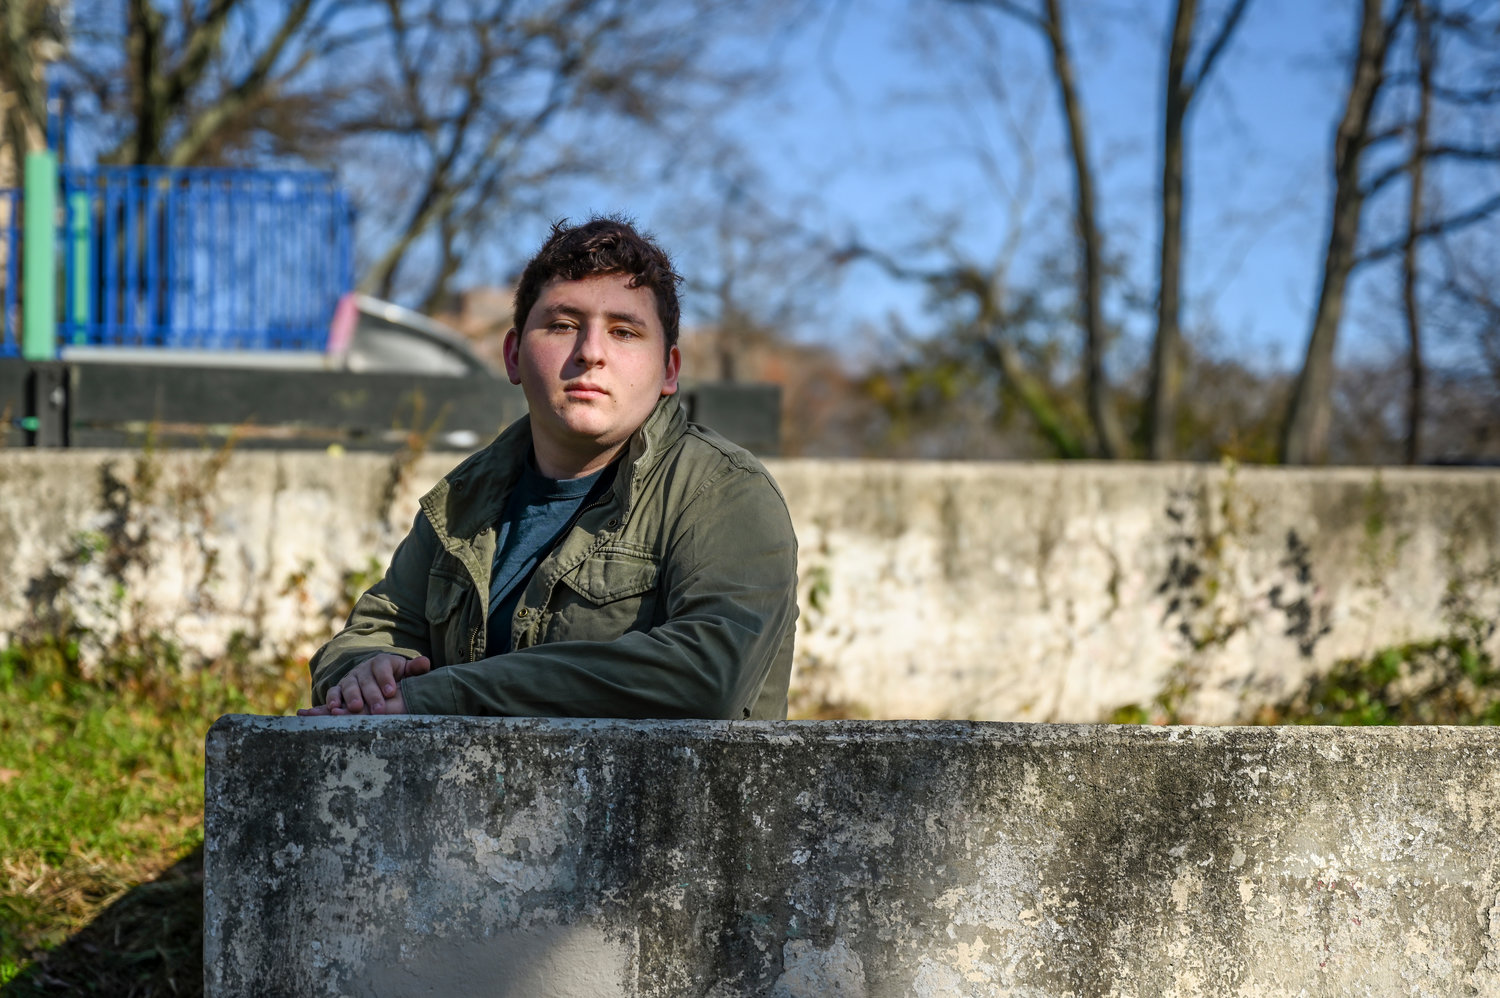 Raphy Jacobson — a senior at the High School of American Studies — says he grew up in a pro-Israel family but has since moved away from Zionism. Jacobson believes Israel is wrong to attack Palestinians, and that its missile strikes don’t live up to the values of Judaism.